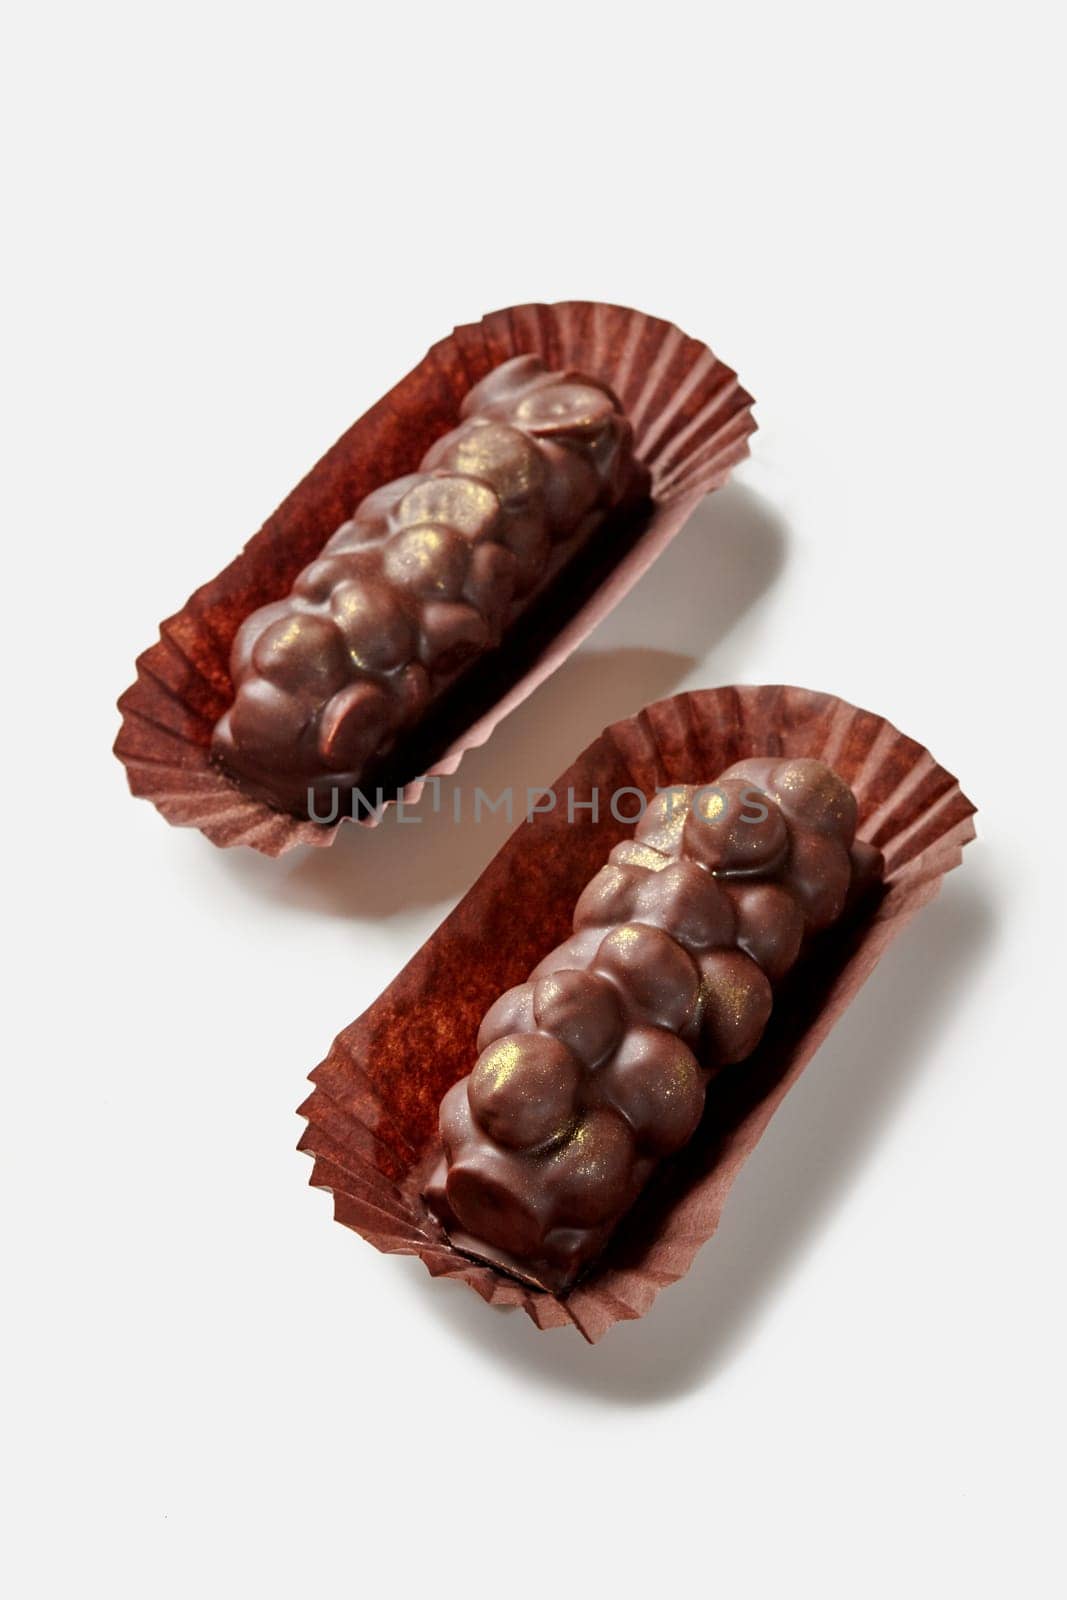 Two artisan dark chocolate bars with hazelnuts in brown paper wrappers presented on white surface, showcasing luxury confectionery